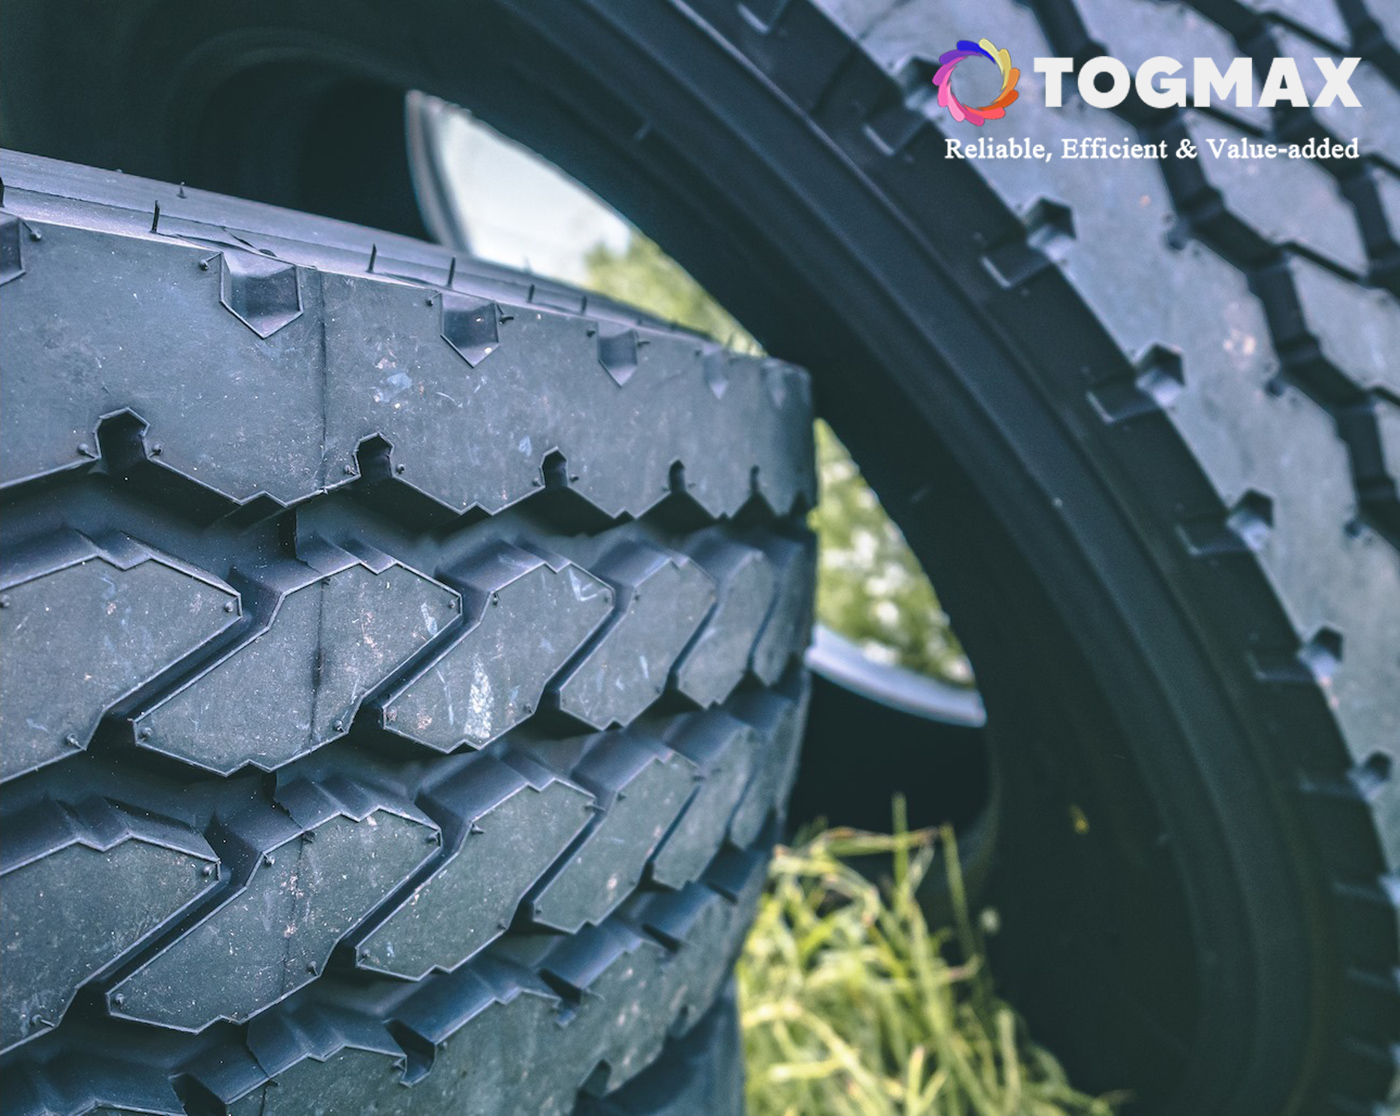 Longmarch LM519 New Zigzag All Position Regional Longhaul Truck Tyres 13R22.5 315/80R22.5 Togmax Group